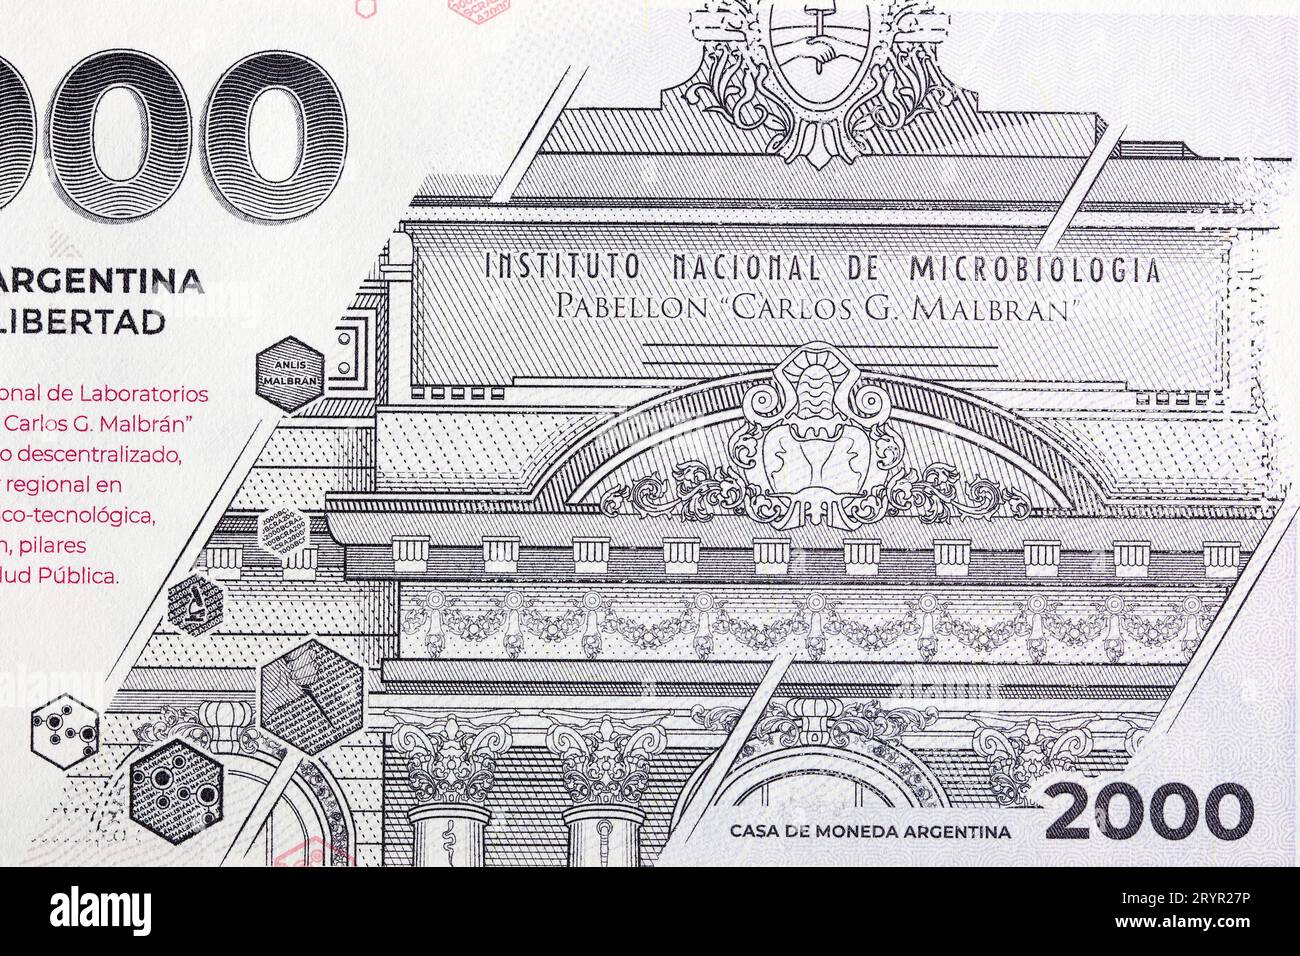 Carlos Malbran National Institute of Microbiology from Argentine money - peso Stock Photo